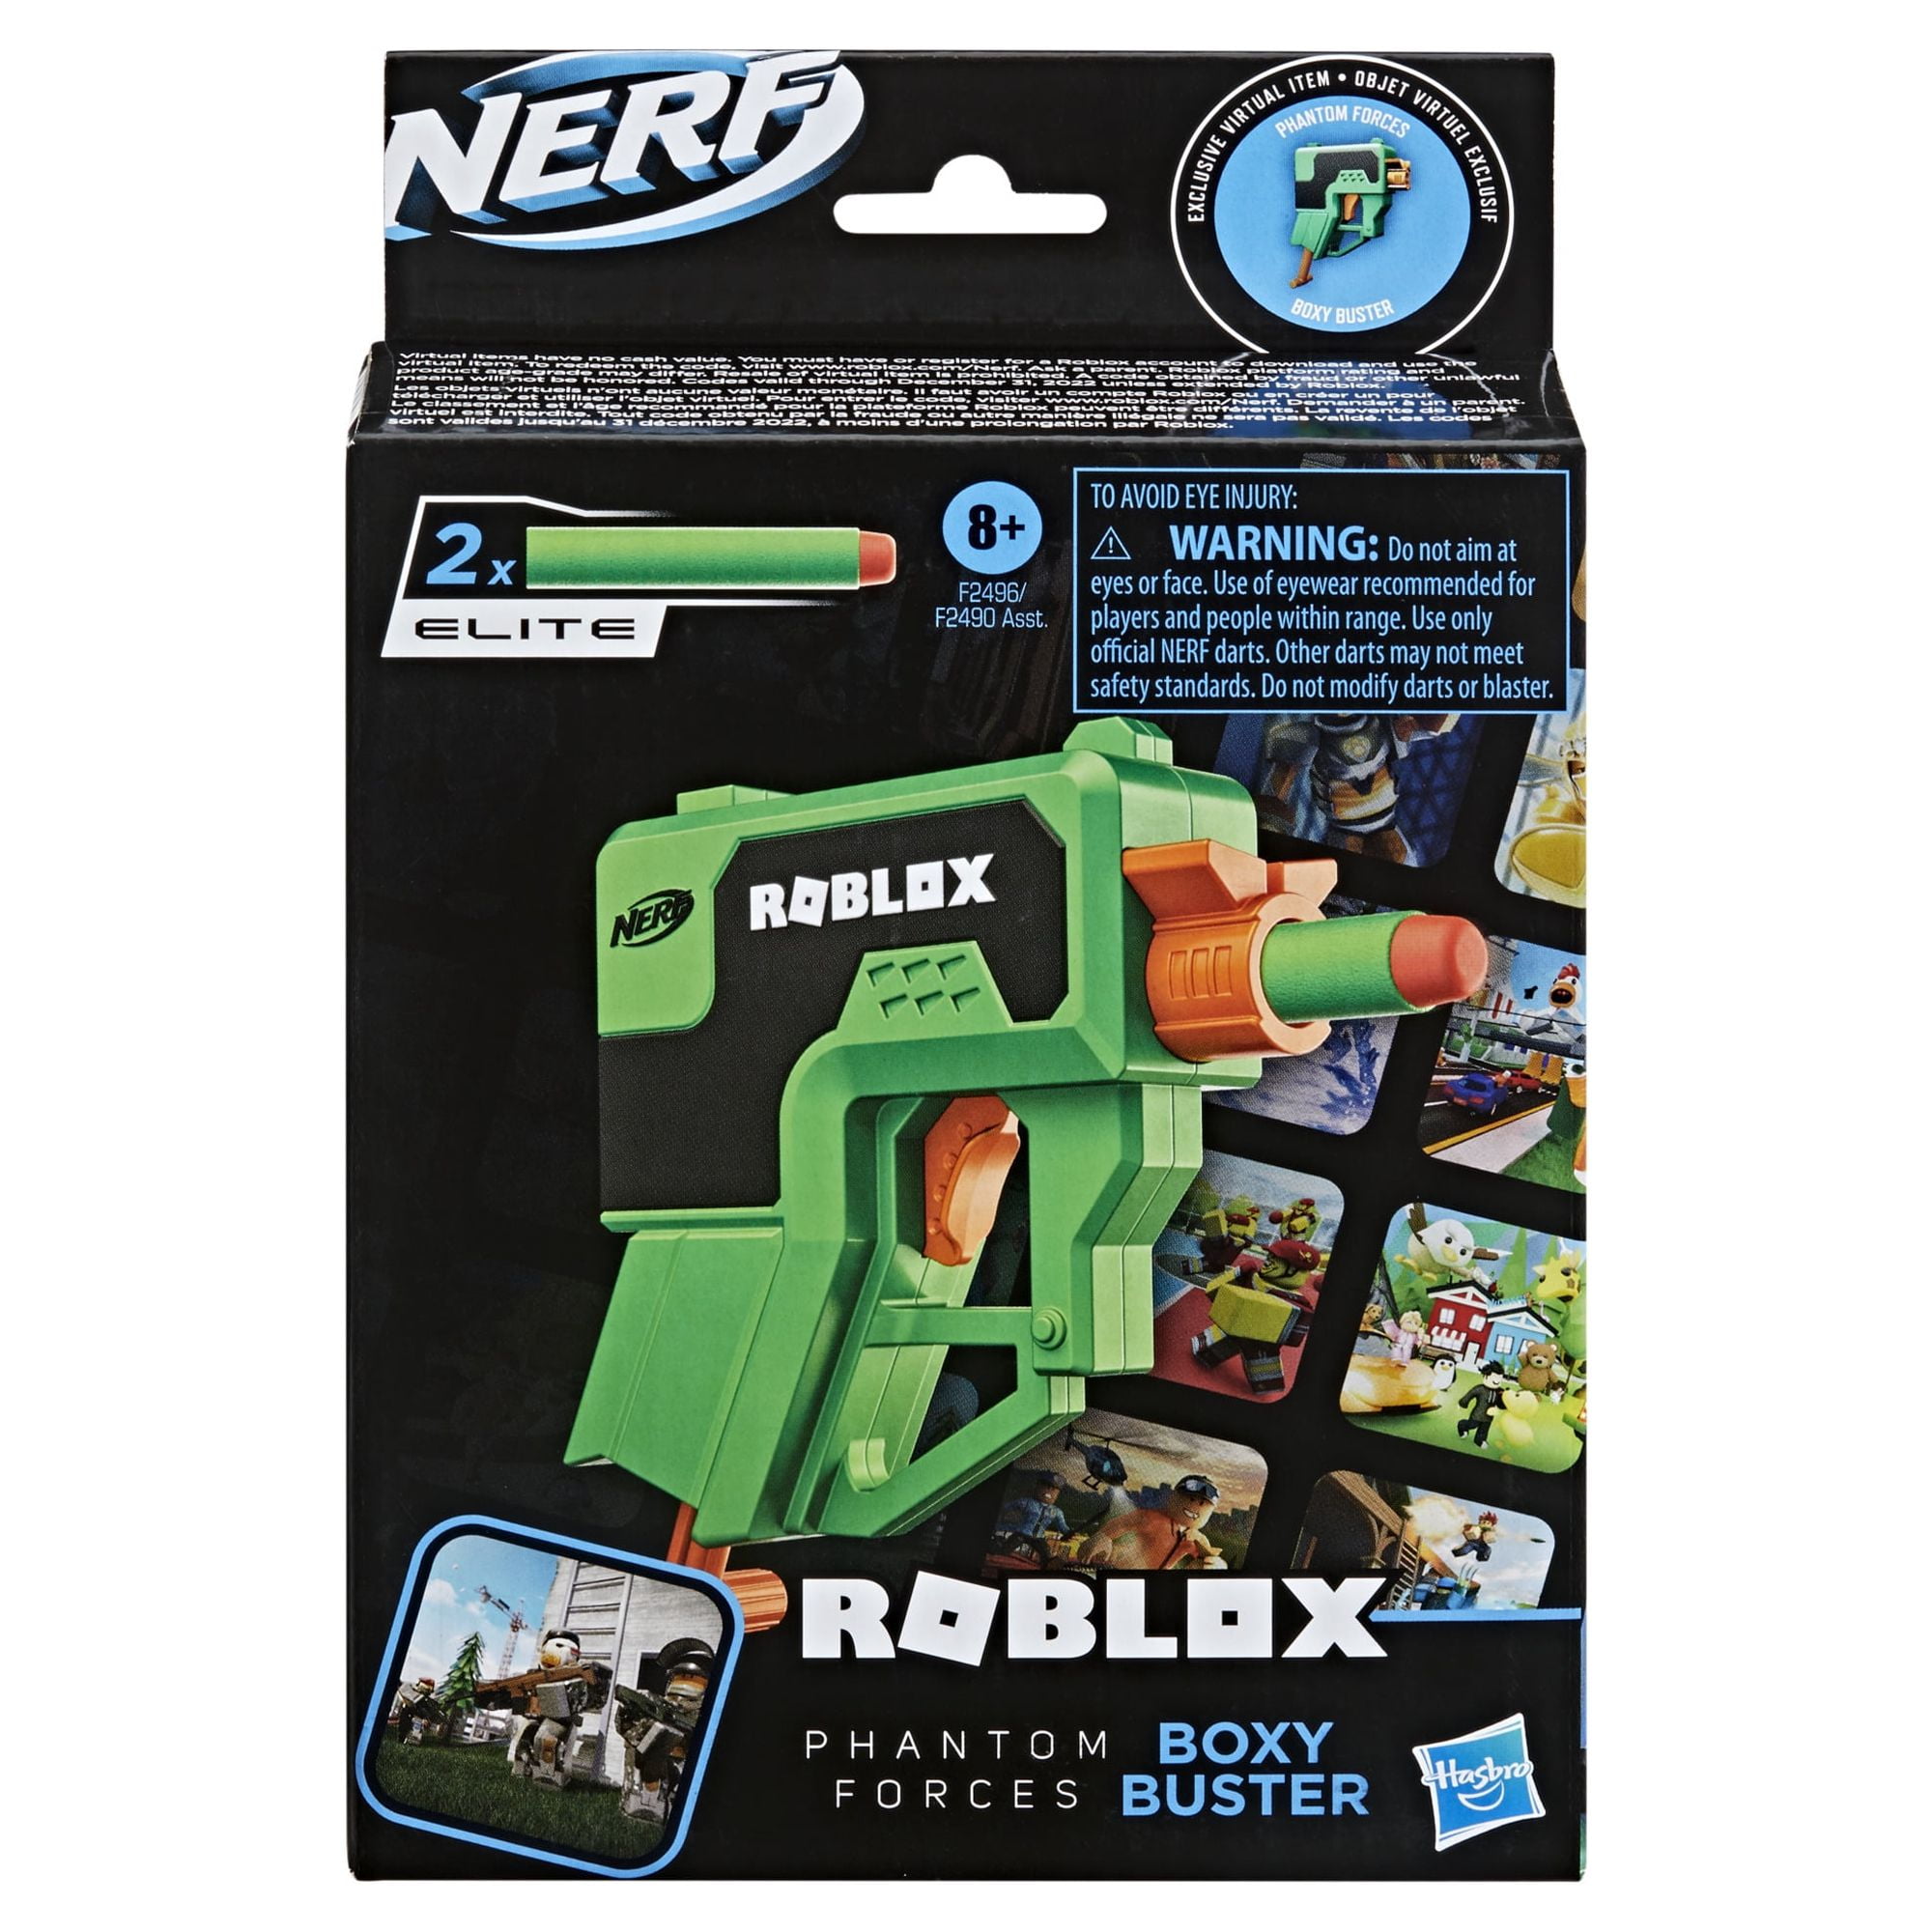 NERF Roblox MM2 Dartbringer F3776 - Toy guns and accessories - Photopoint